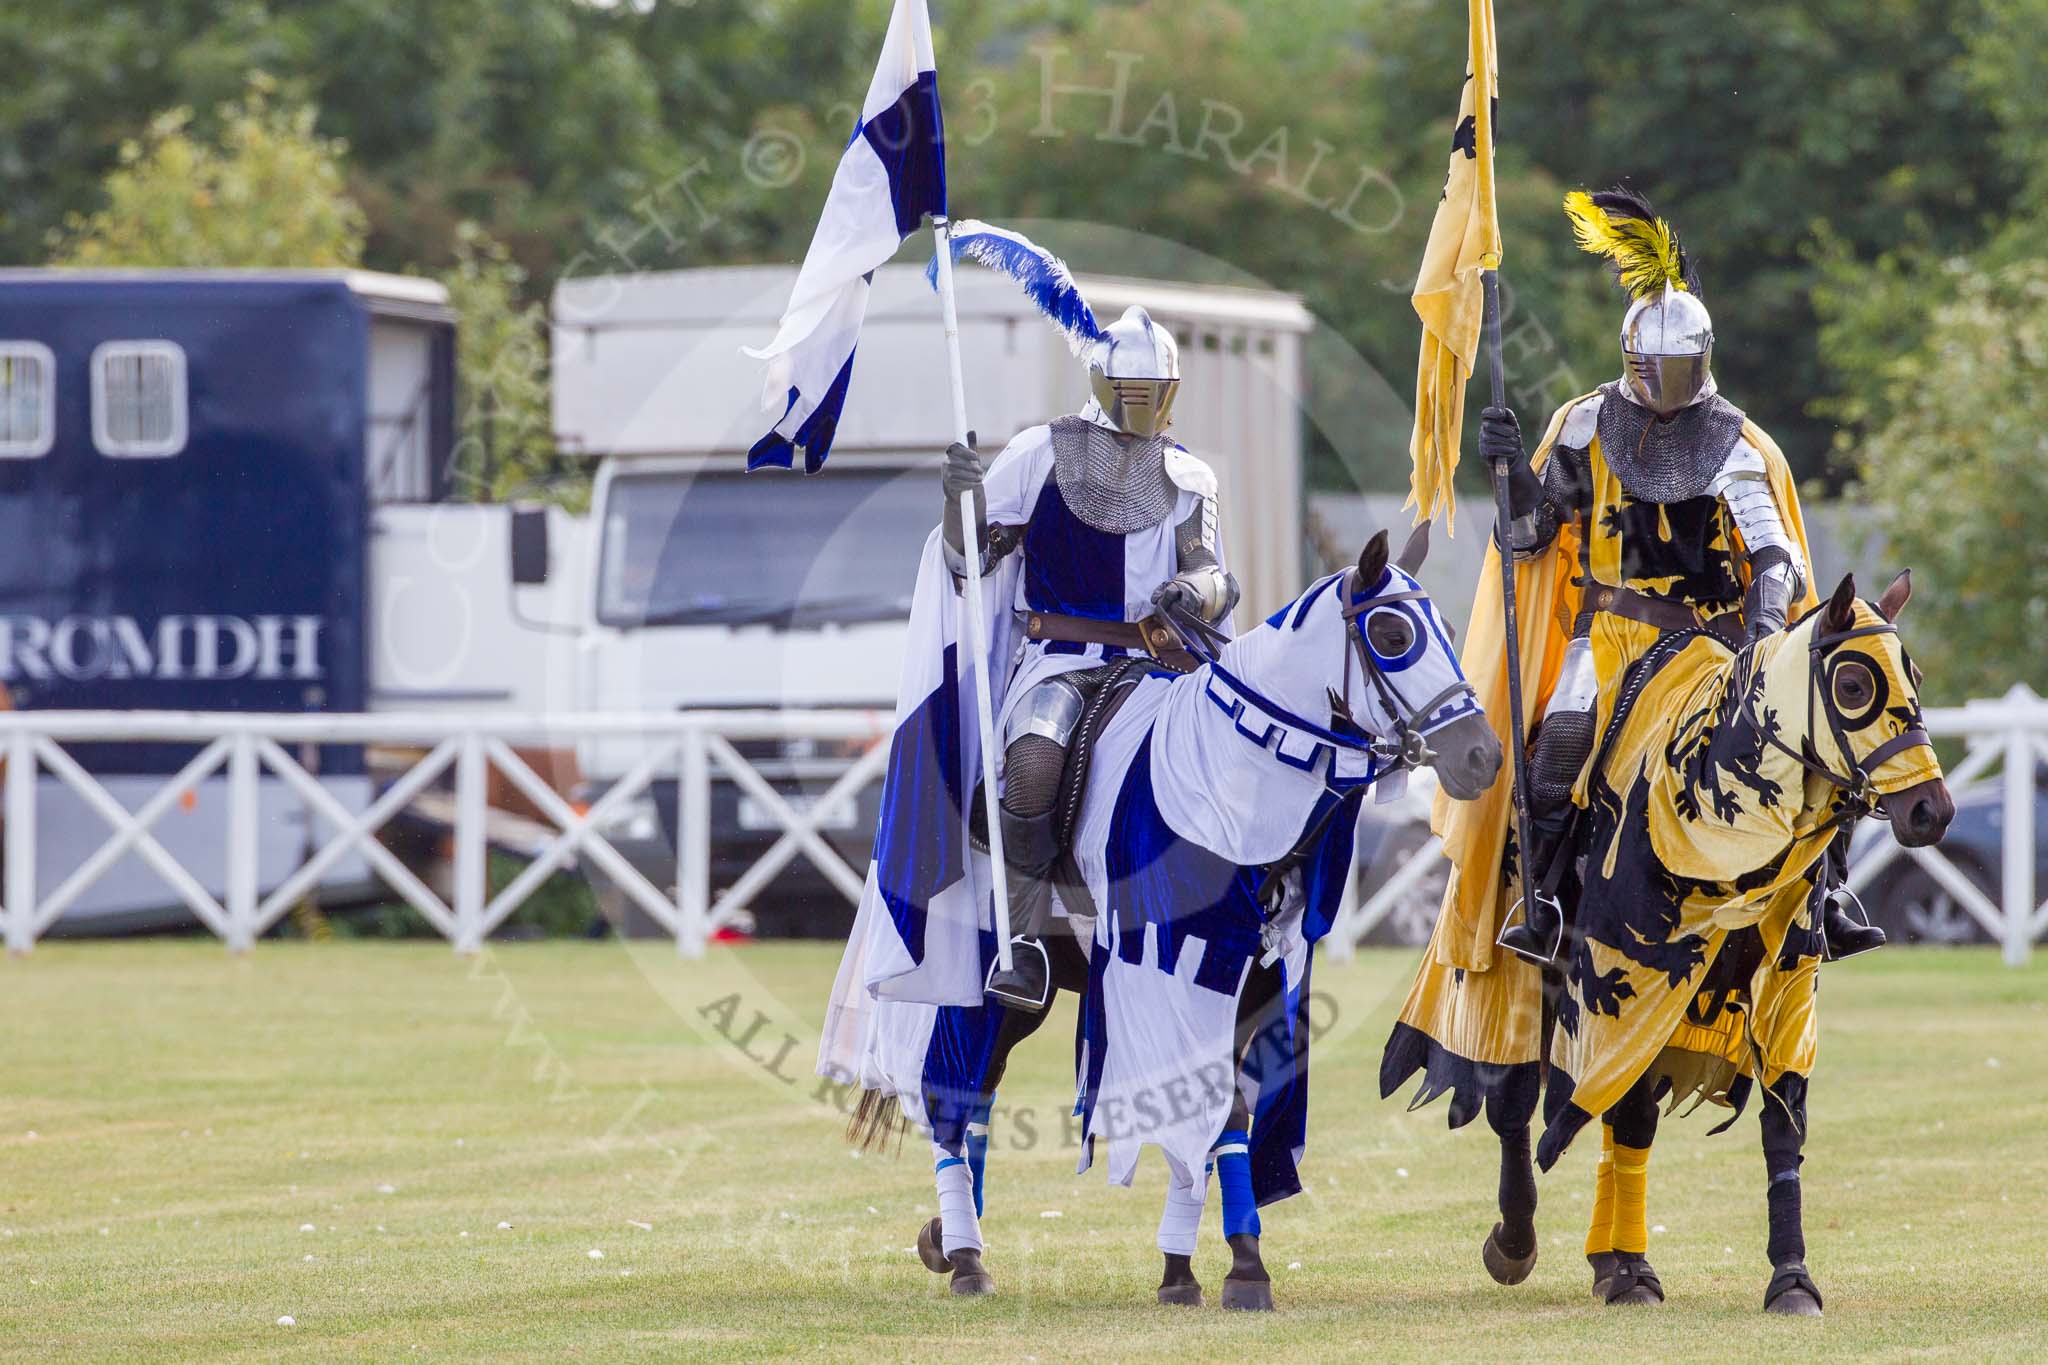 DBPC Polo in the Park 2013 - jousting display by the Knights of Middle England.
Dallas Burston Polo Club, ,
Southam,
Warwickshire,
United Kingdom,
on 01 September 2013 at 15:18, image #438